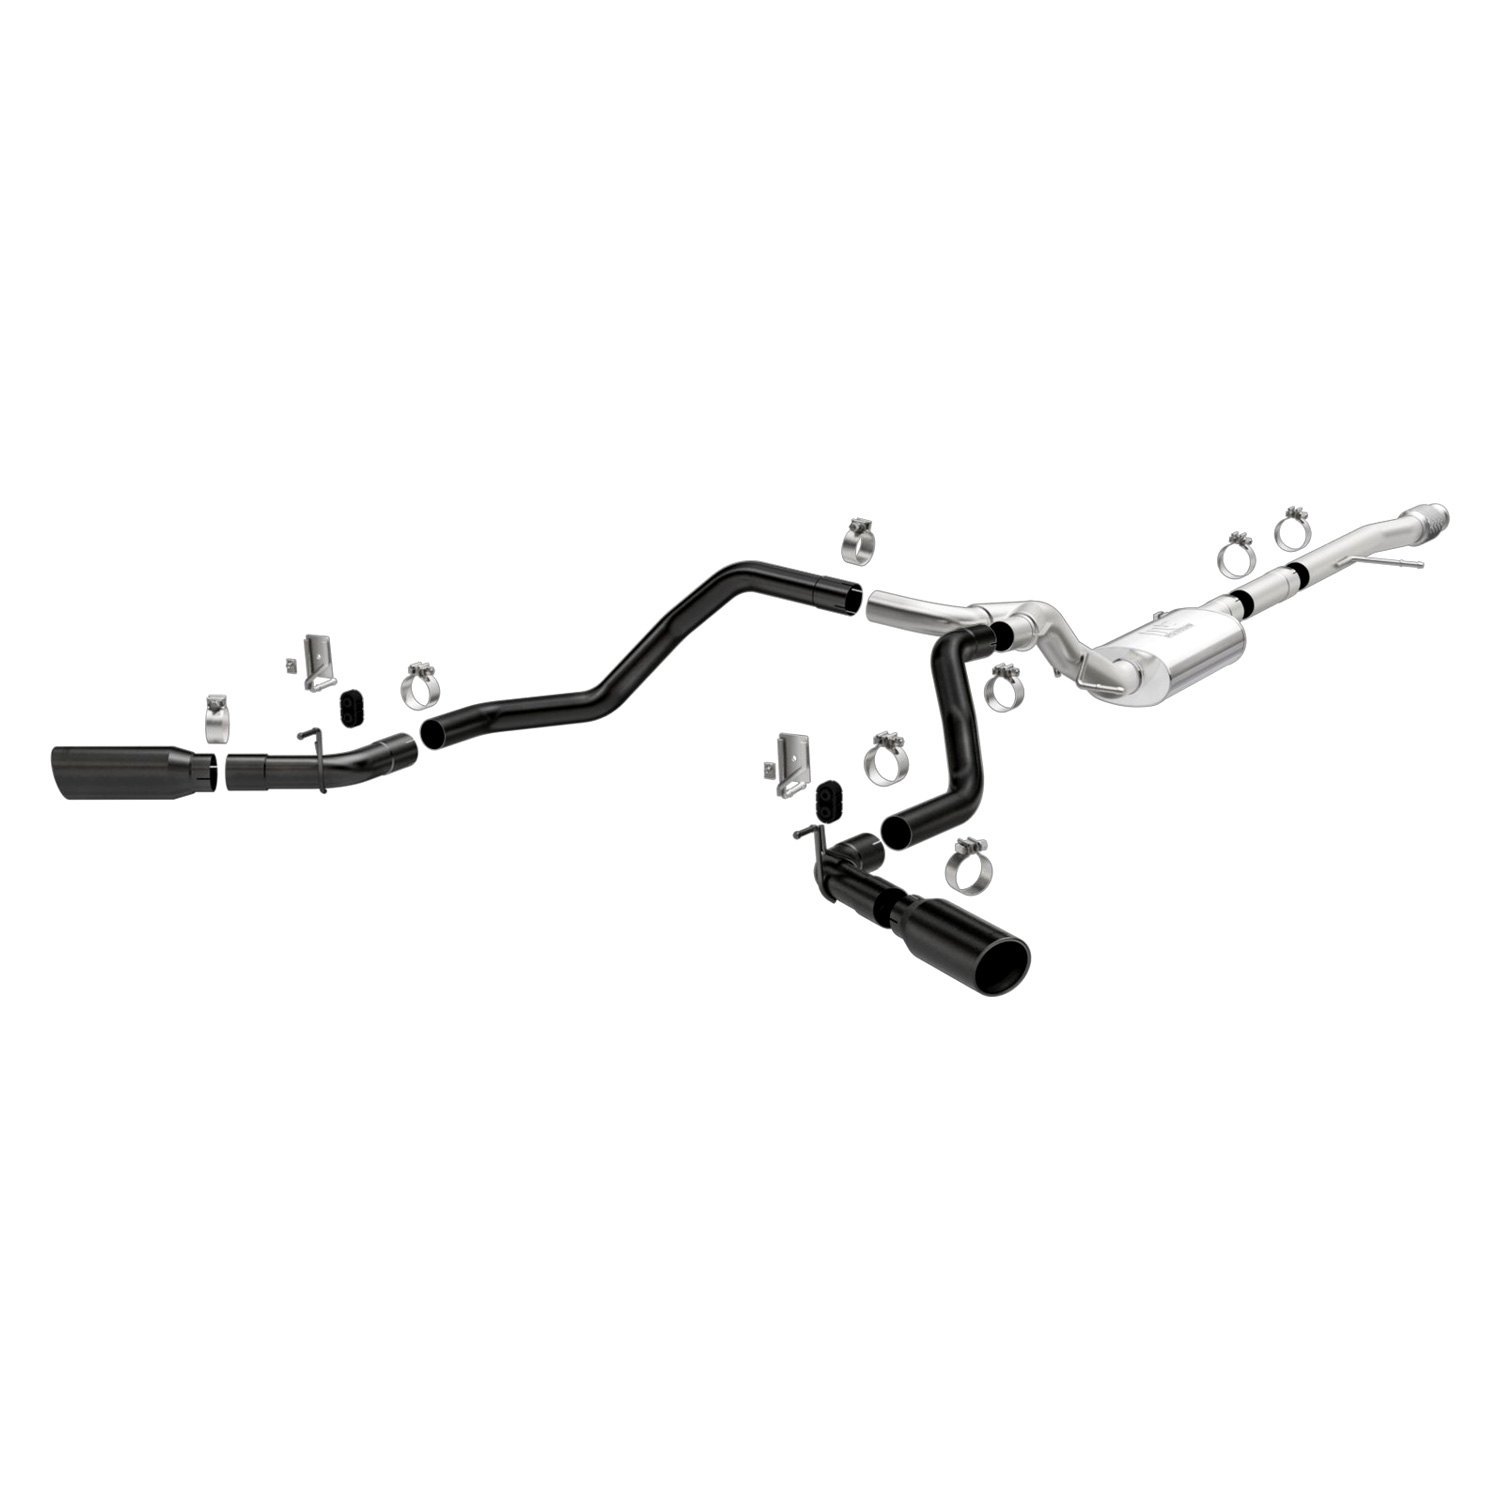 For Chevy Silverado 1500 19-20 Exhaust System Series Stainless Steel